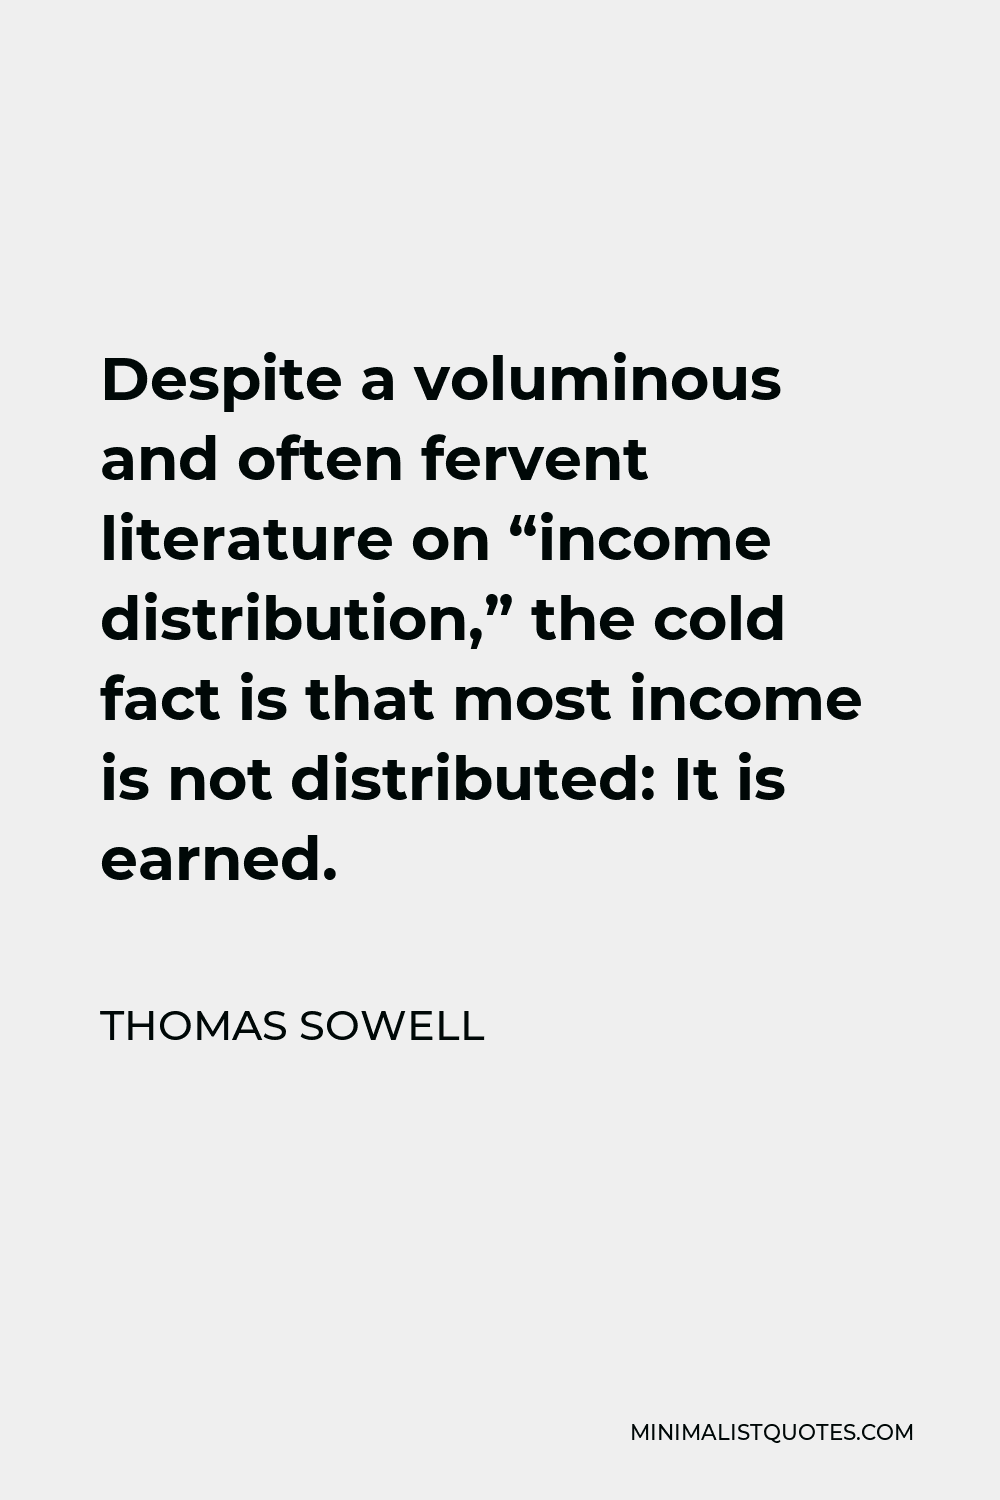 Thomas Sowell Quote - Despite a voluminous and often fervent literature on “income distribution,” the cold fact is that most income is not distributed: It is earned.